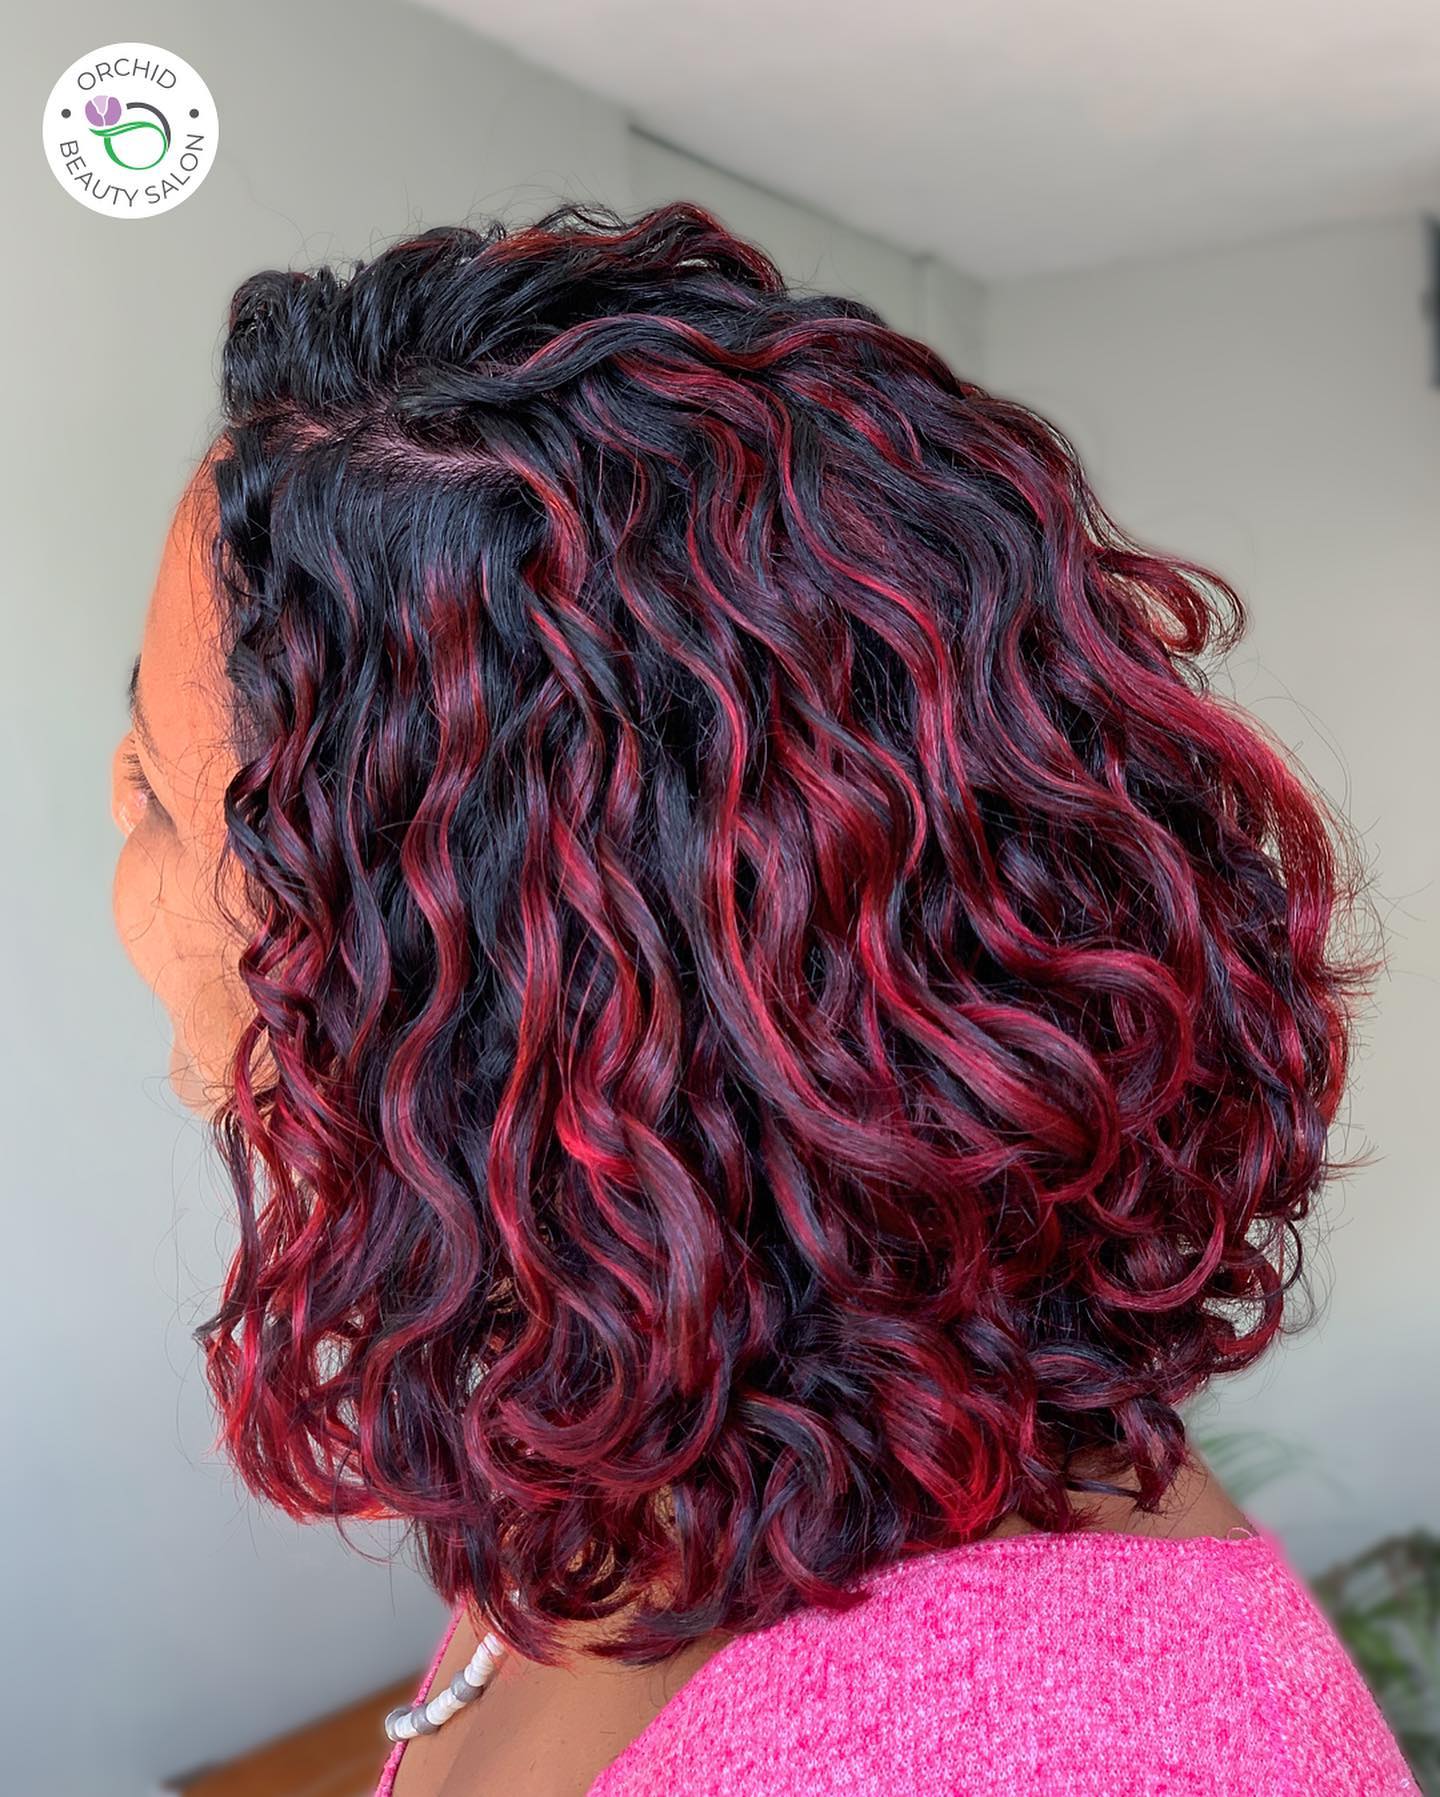 Spiced Cherry Red Is the Juiciest New Hair-Color Trend for Fall